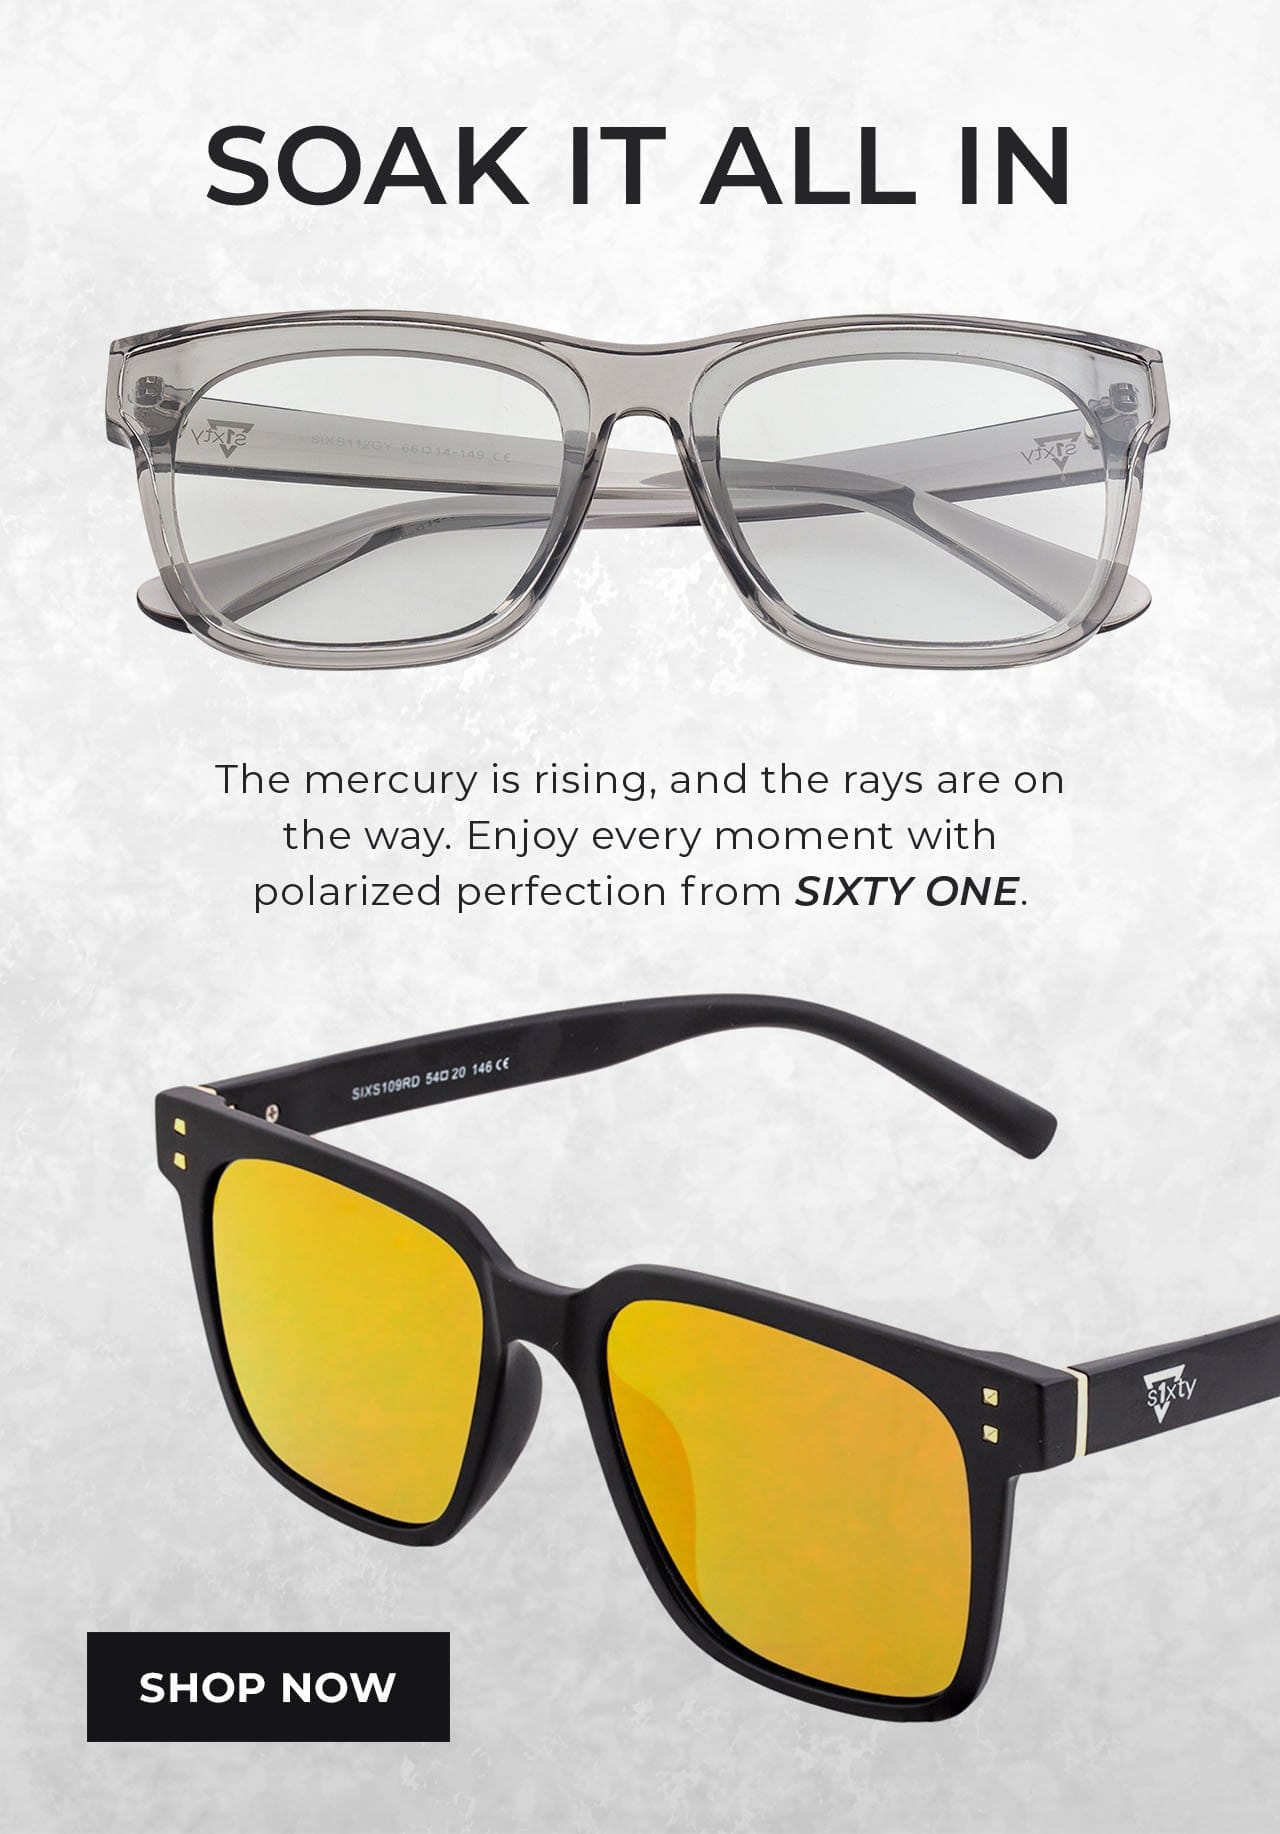 Sixty One Sunglasses | SHOP NOW